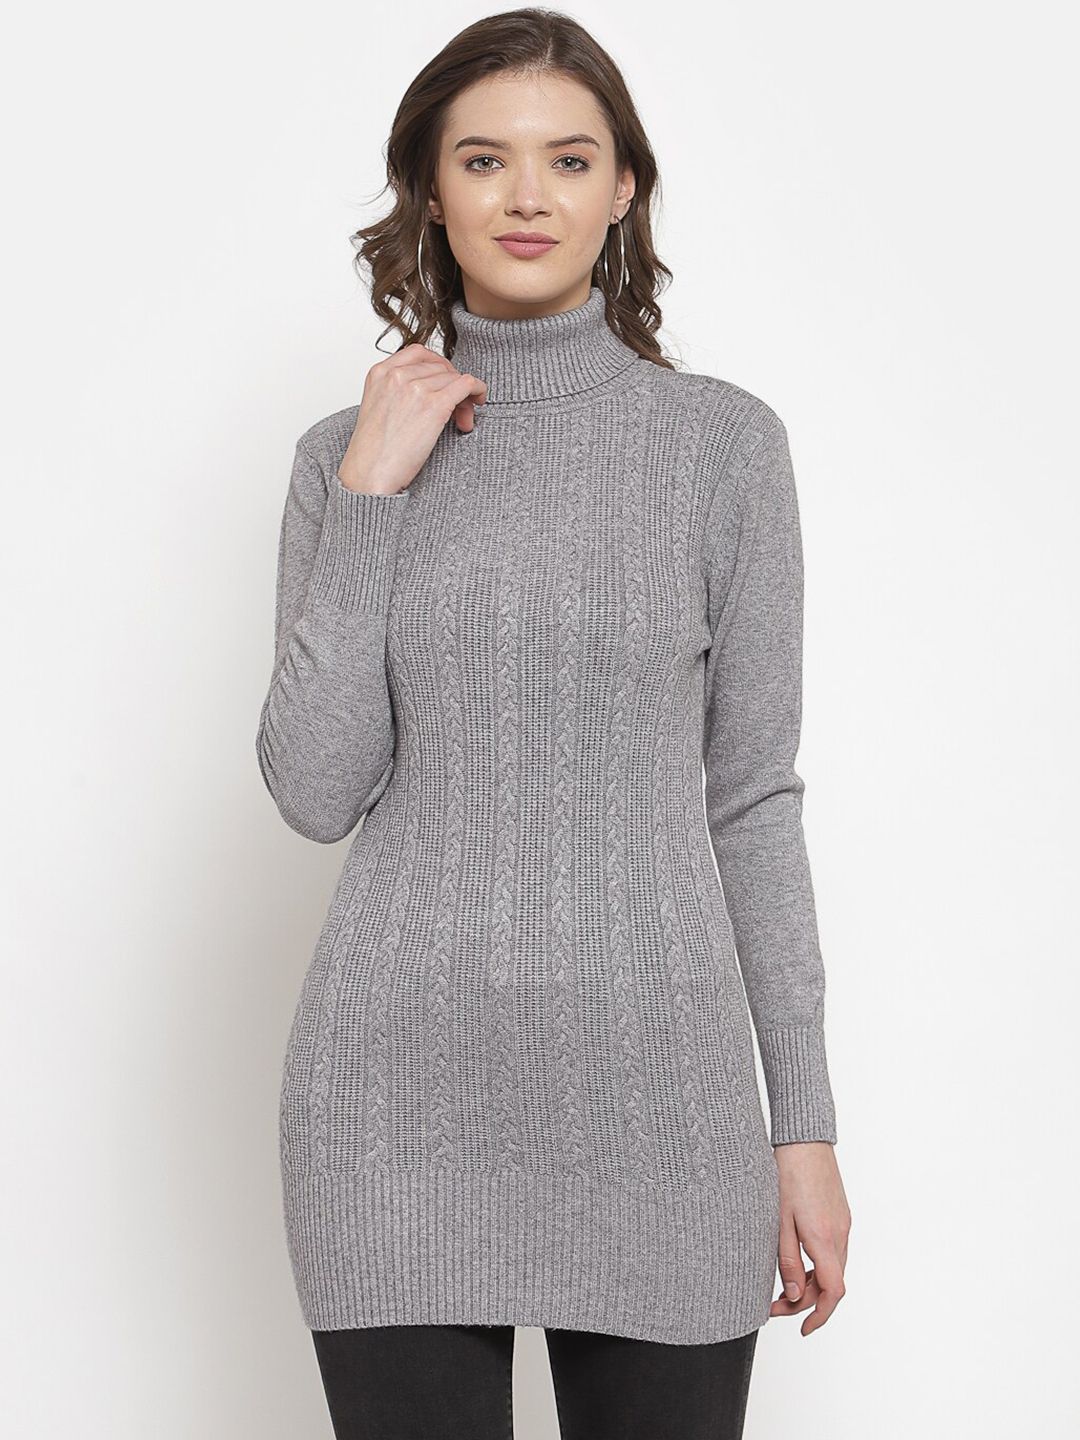 Mafadeny Women Grey Long Turtle Neck Cable Knit Sweater Price in India